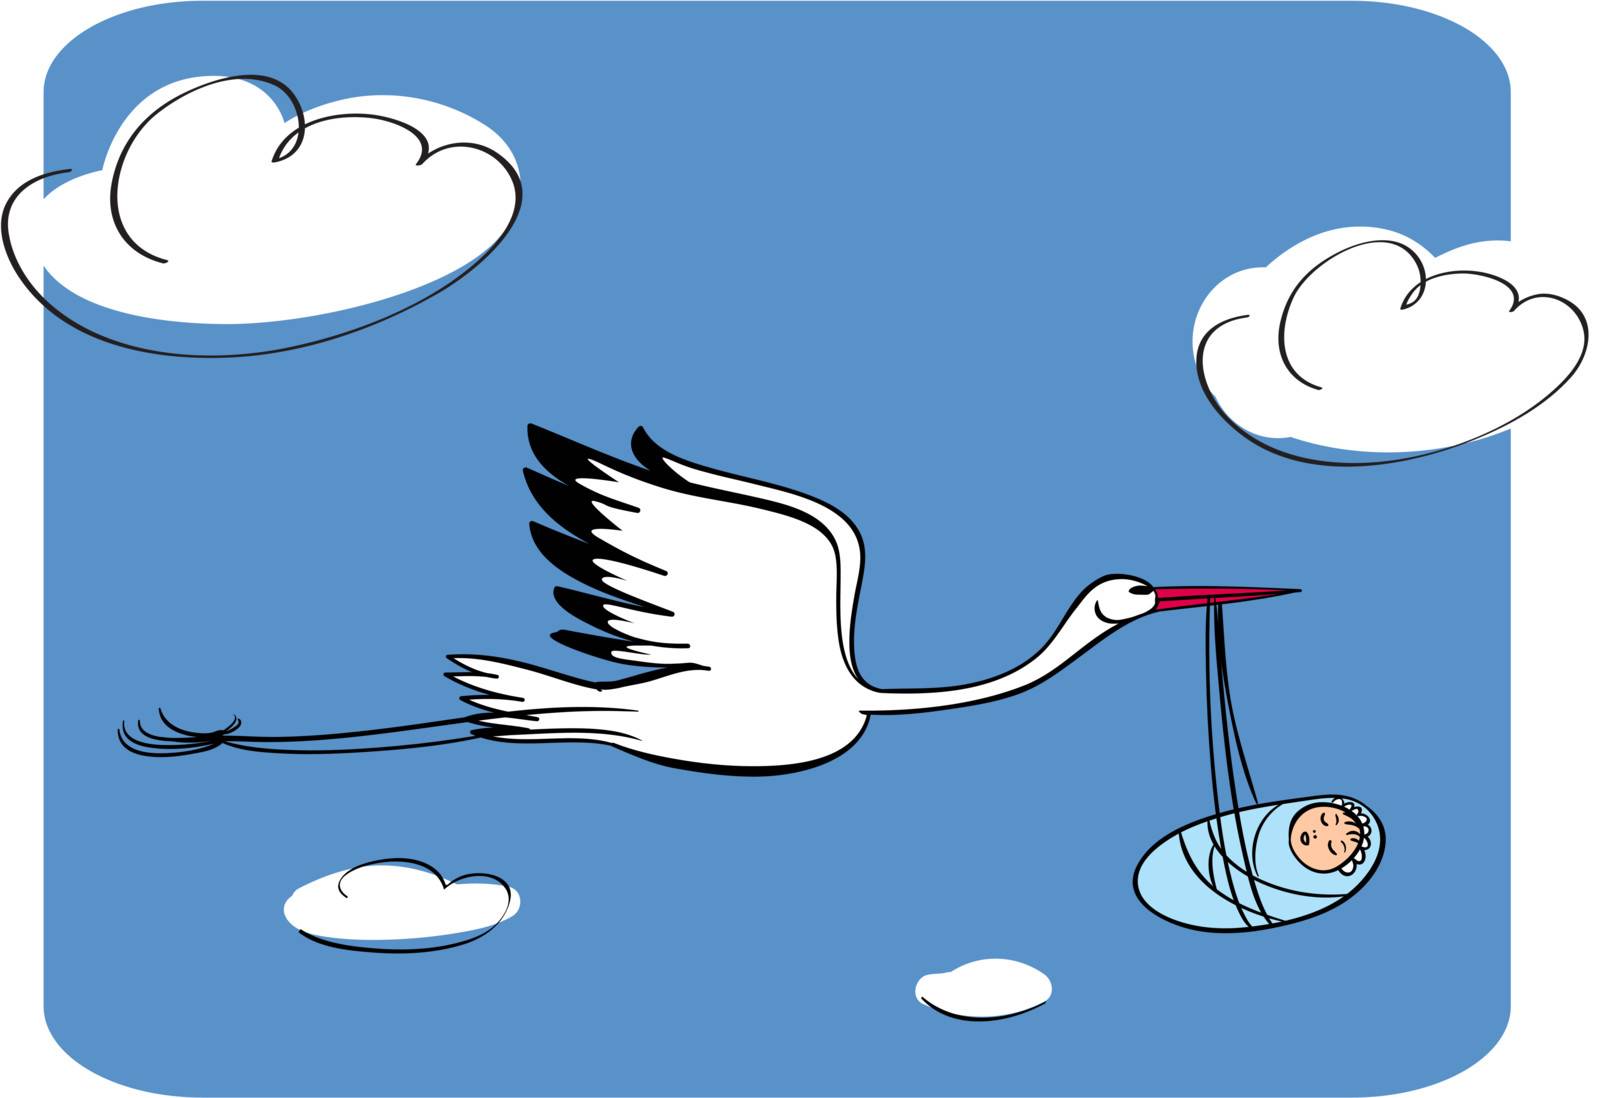 Stork with the kid  by ESSL